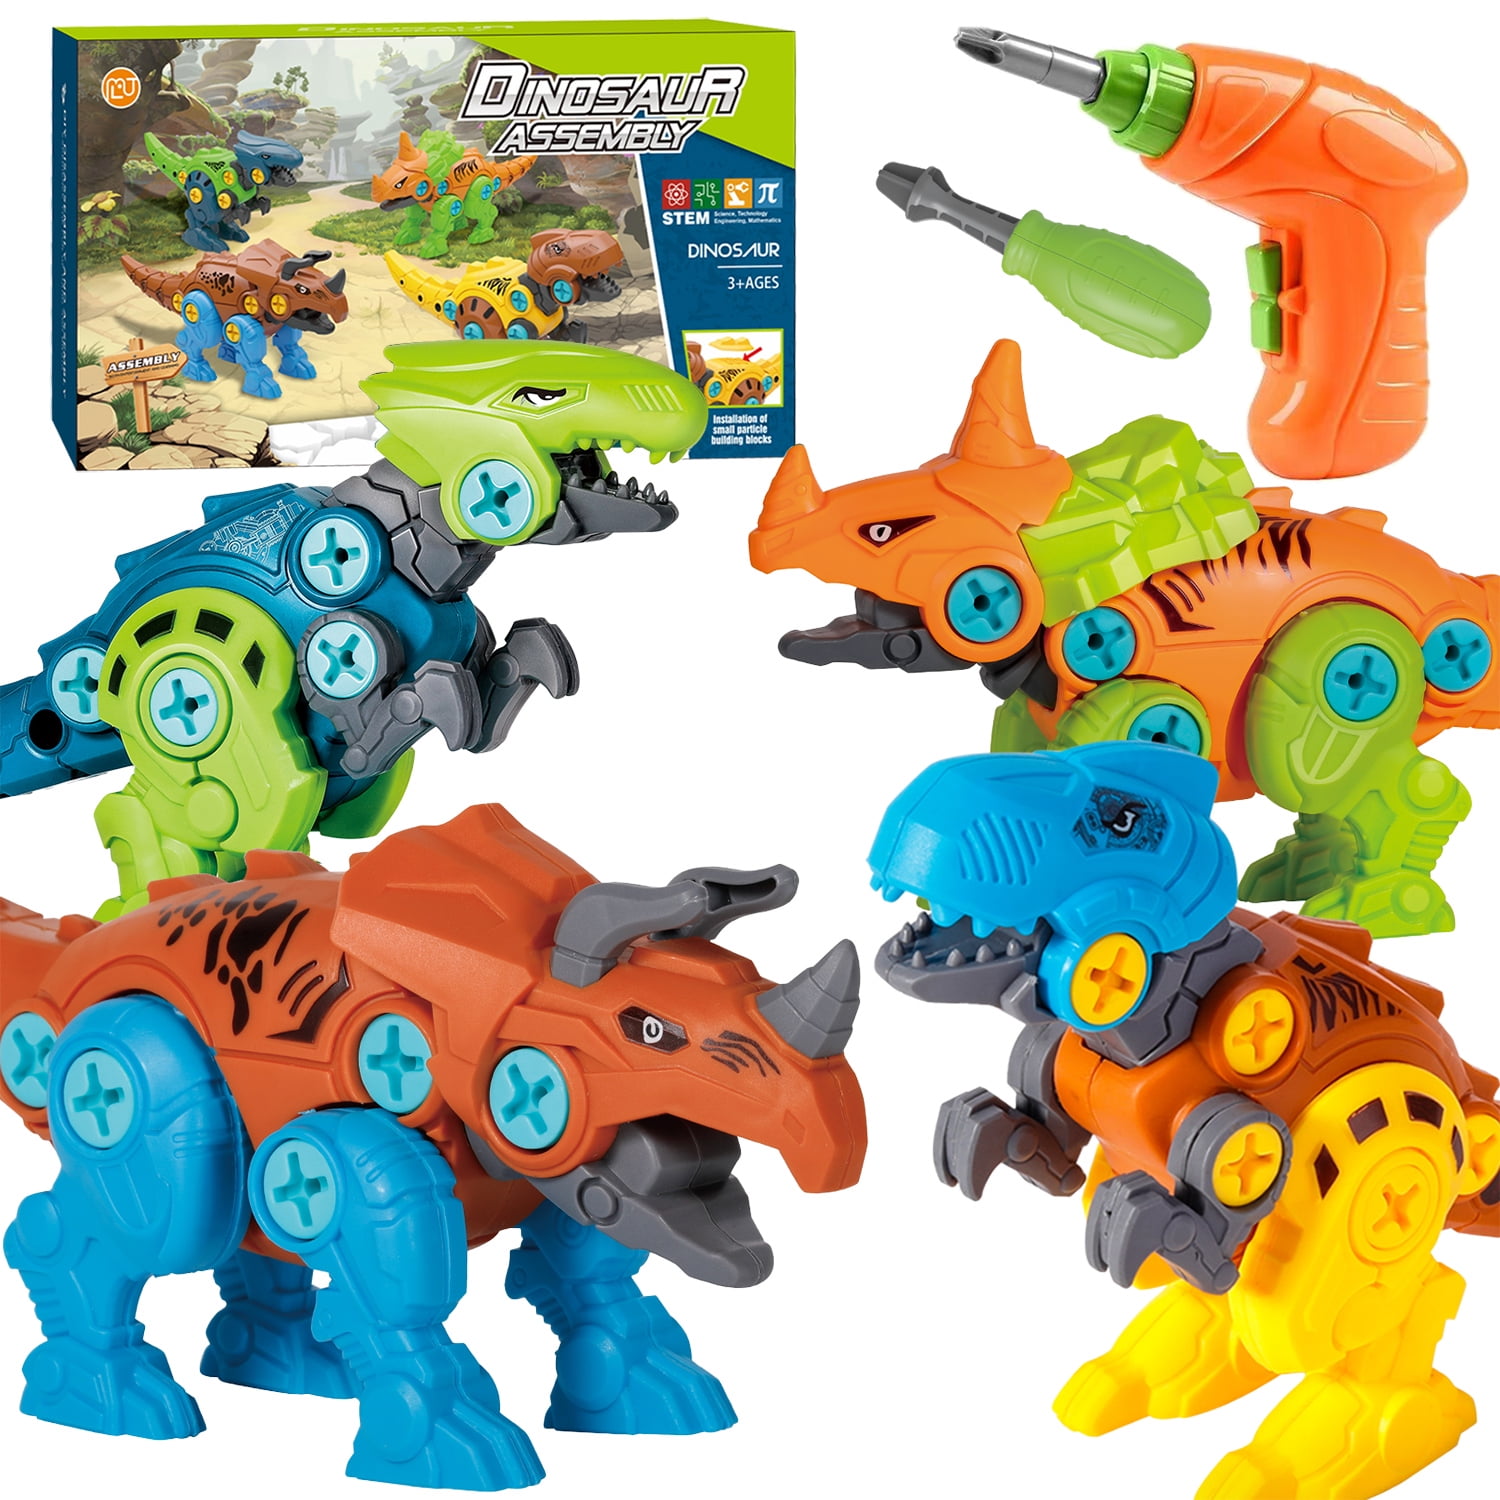 4 Pack Take Apart Dinosaur Toys STEM Puzzles Construction Engineering Kits Building Blocks with Electric Drill Toys for 3 4 5 6 7 8 Year Old Boys Girls Toddler Gifts Dinosaur Toys for Kids 3-5